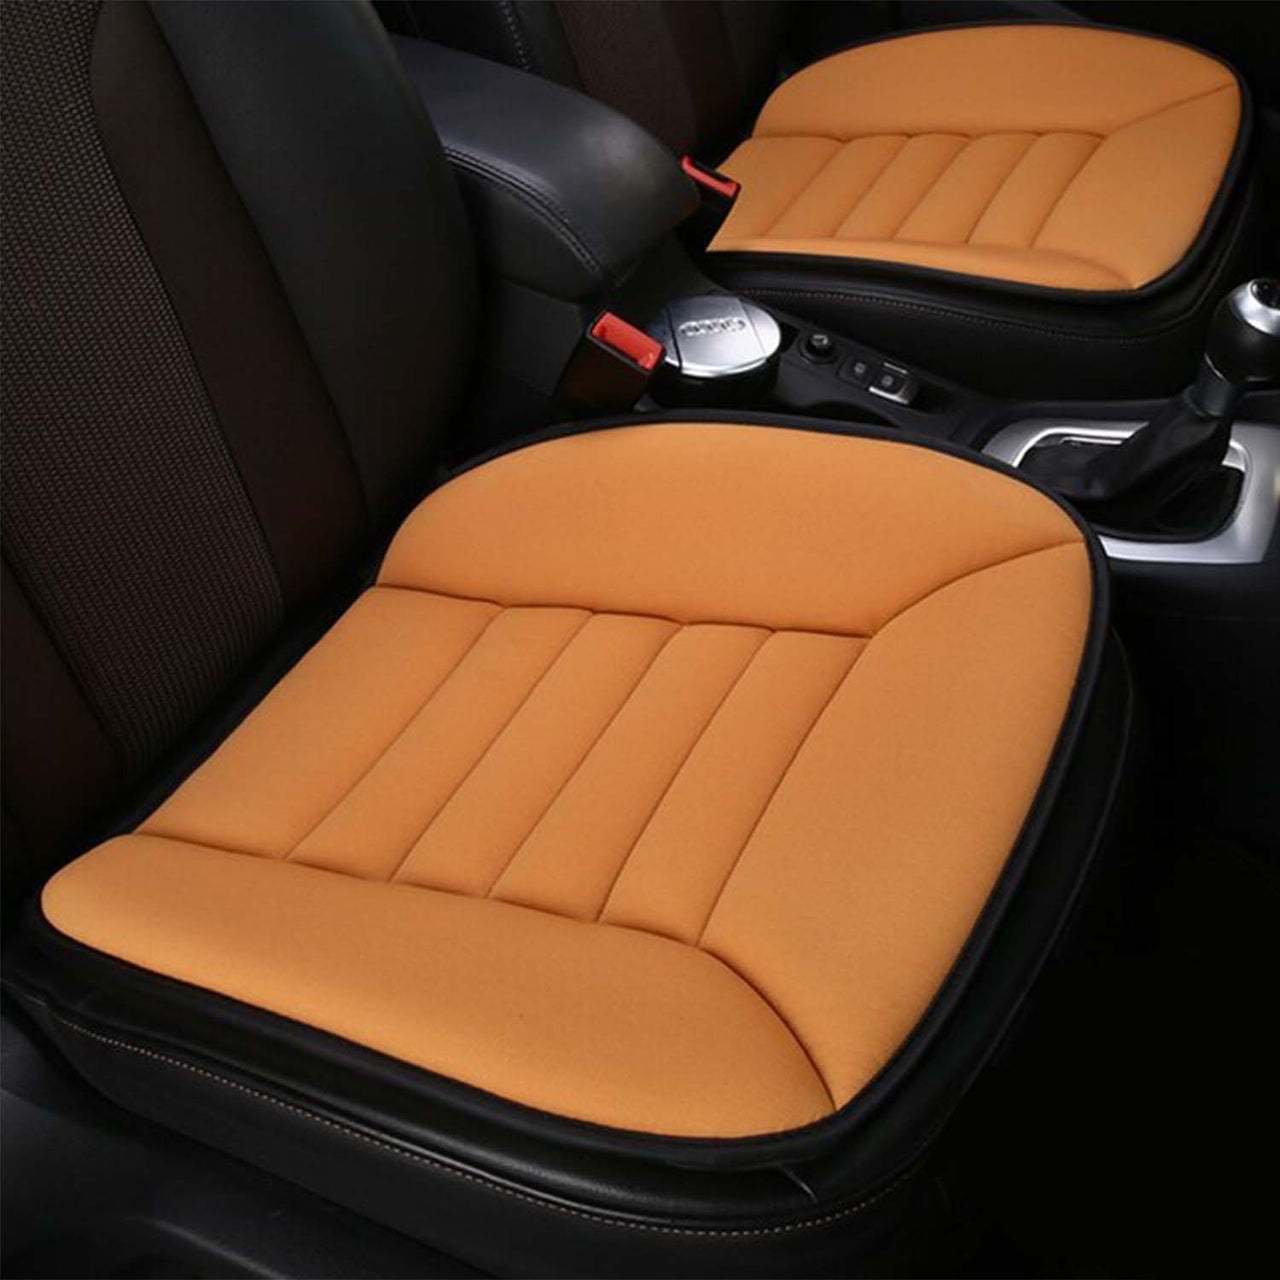 Car Seat Cushion with 1.2inch Comfort Memory Foam, Custom Logo For Your Cars, Seat Cushion for Car and Office Chair AR19989